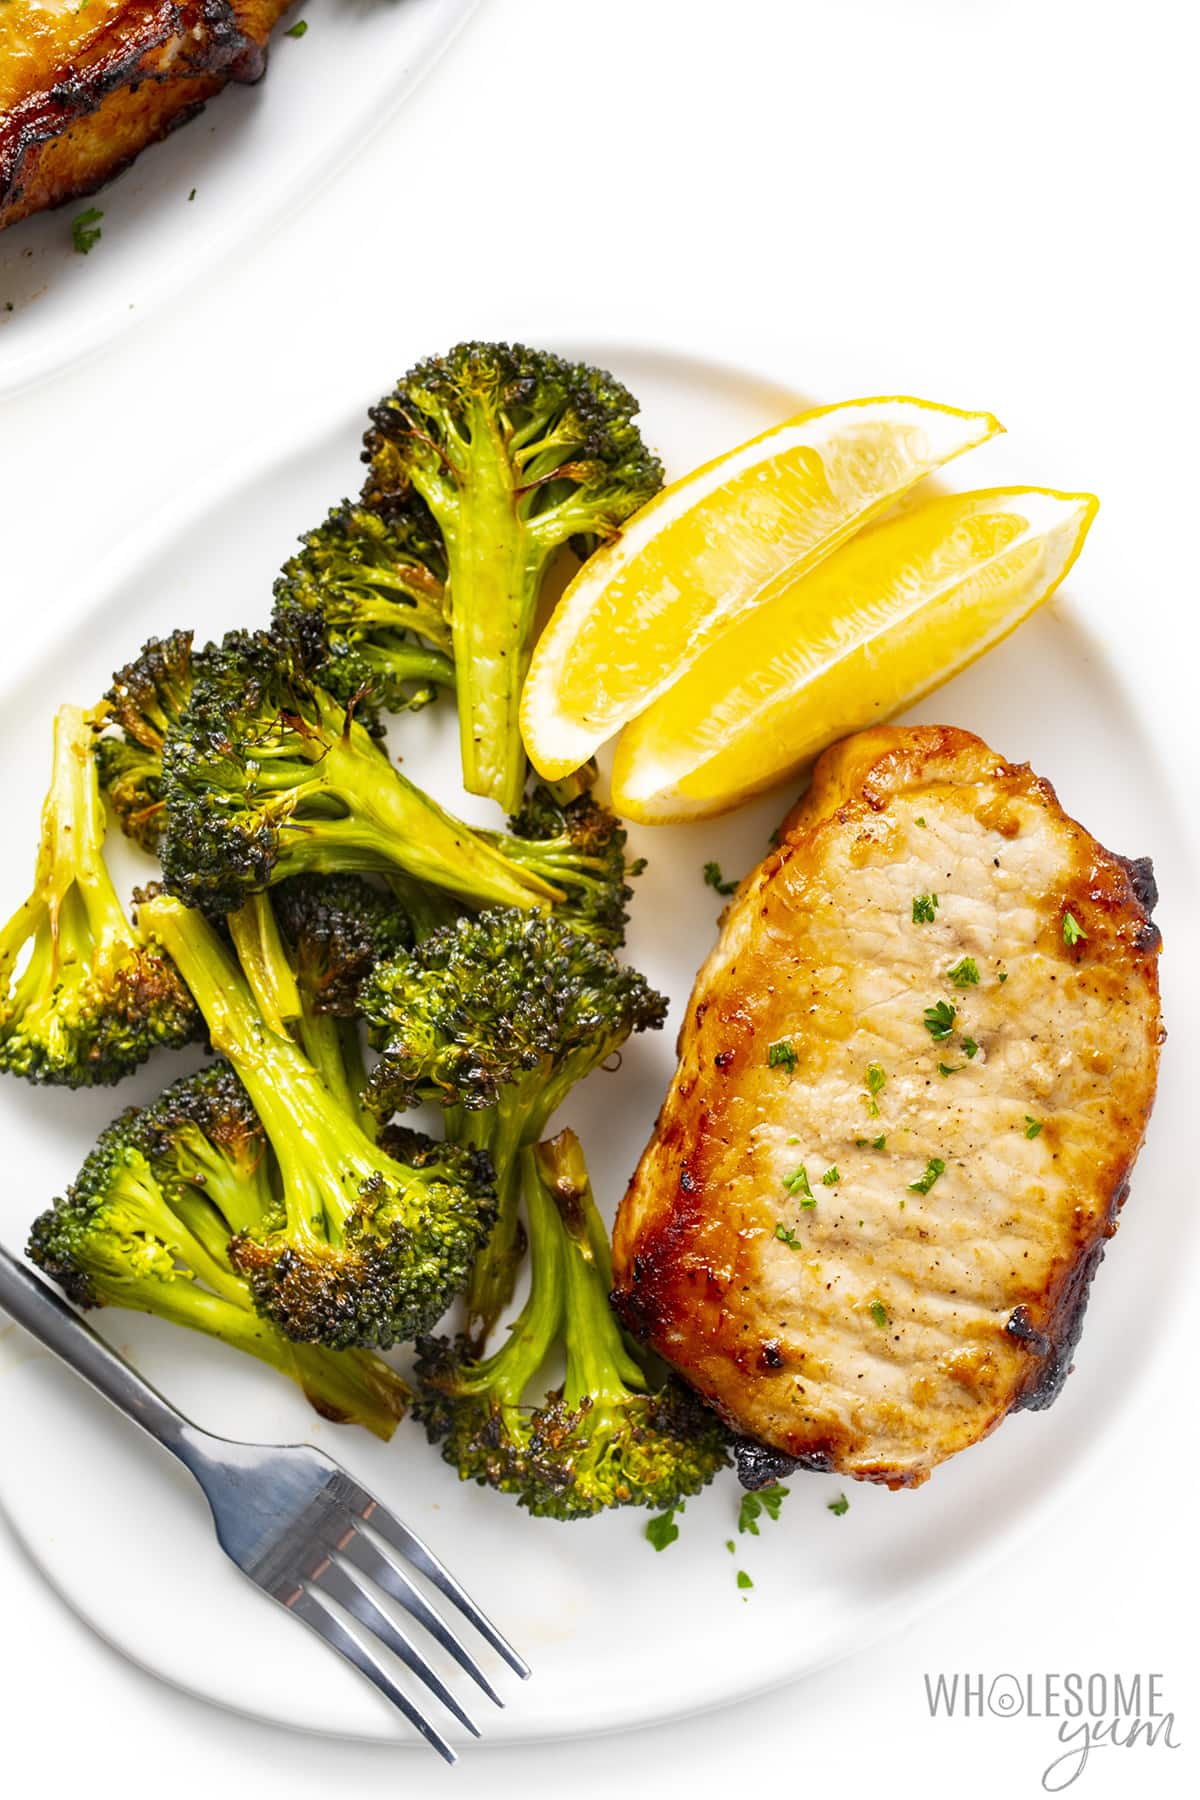 Air fryer boneless pork chops on a plate with roasted broccoli and lemon wedges.